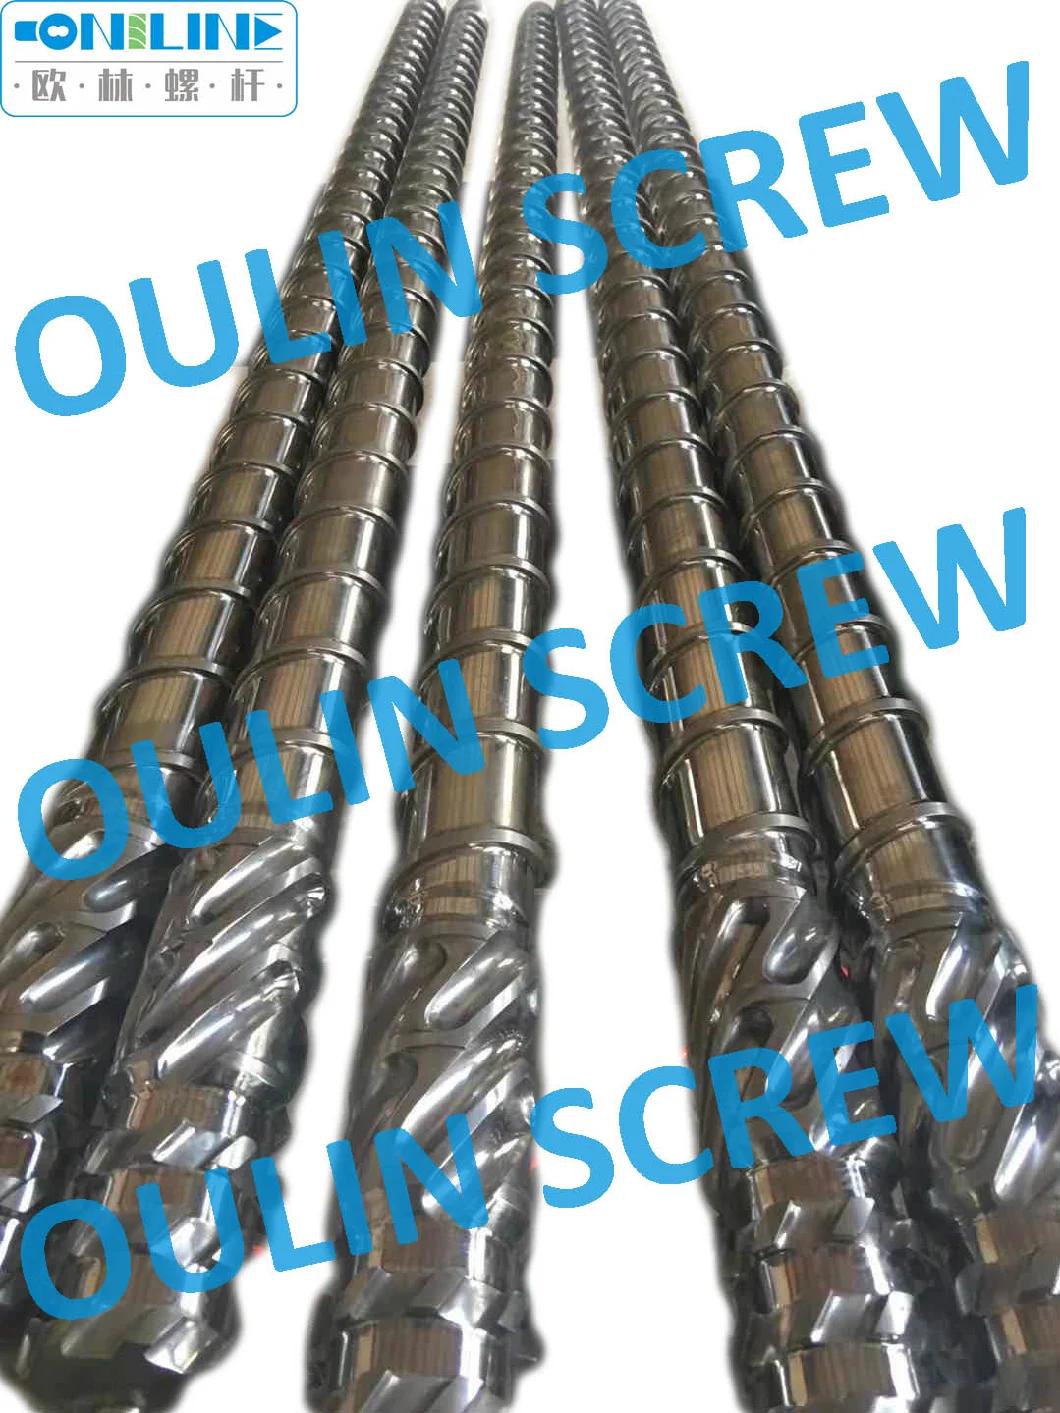 Screw and Barrel for PP Non-Woven Fabric for Masks